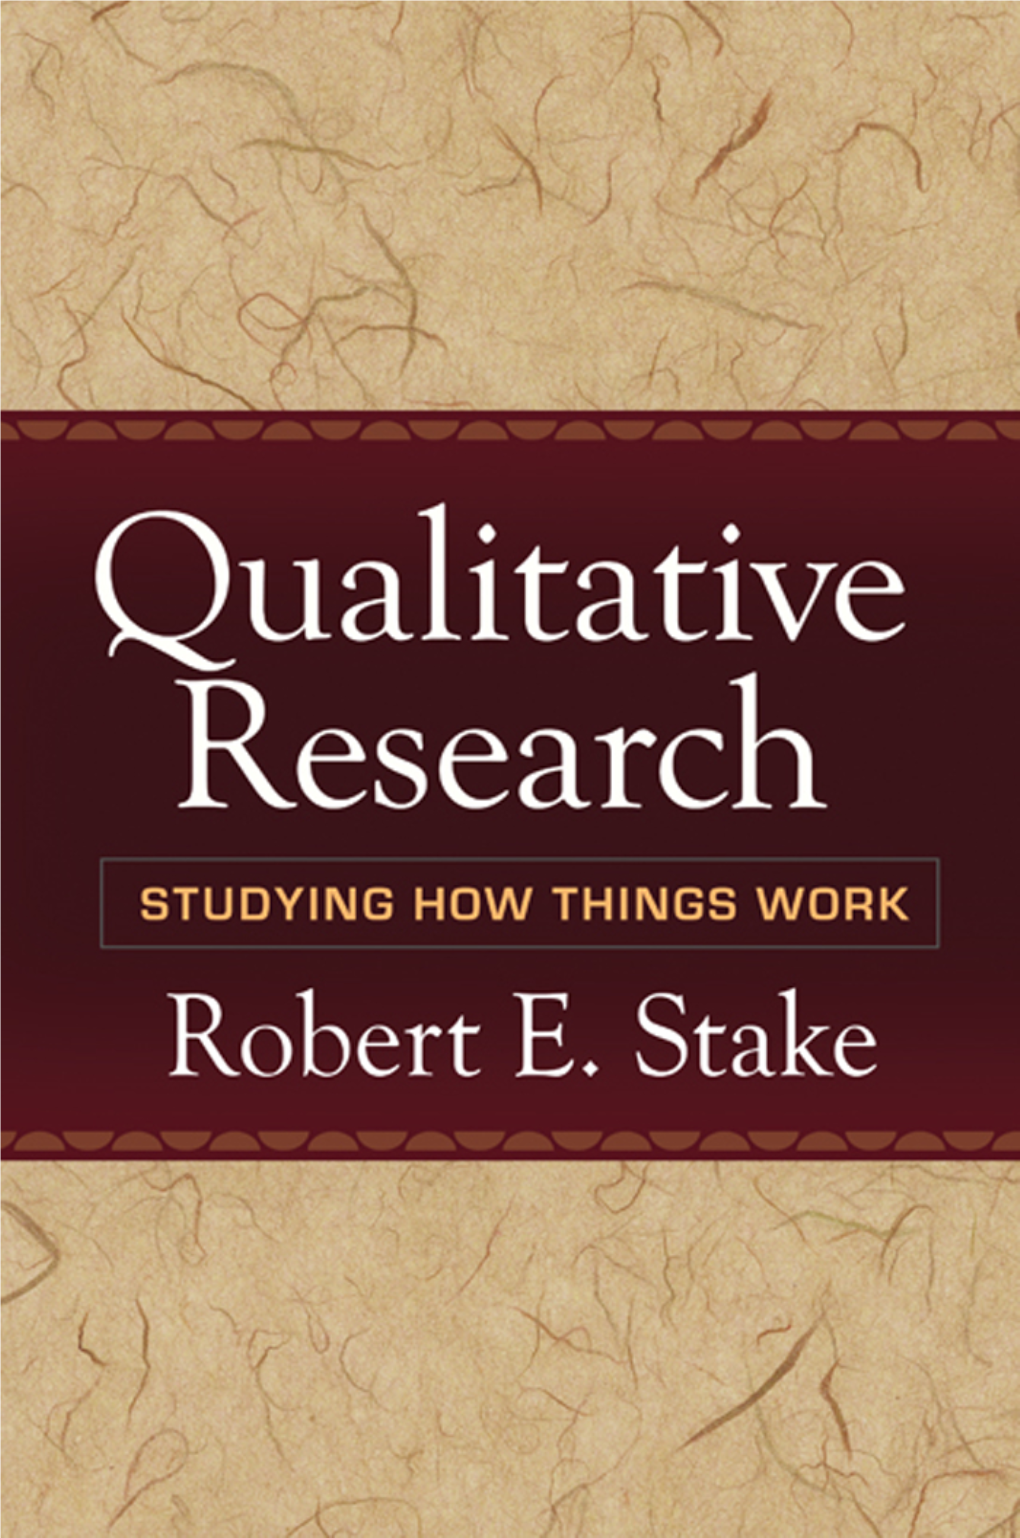 Qualitative Research Studying How Things Work.Pdf